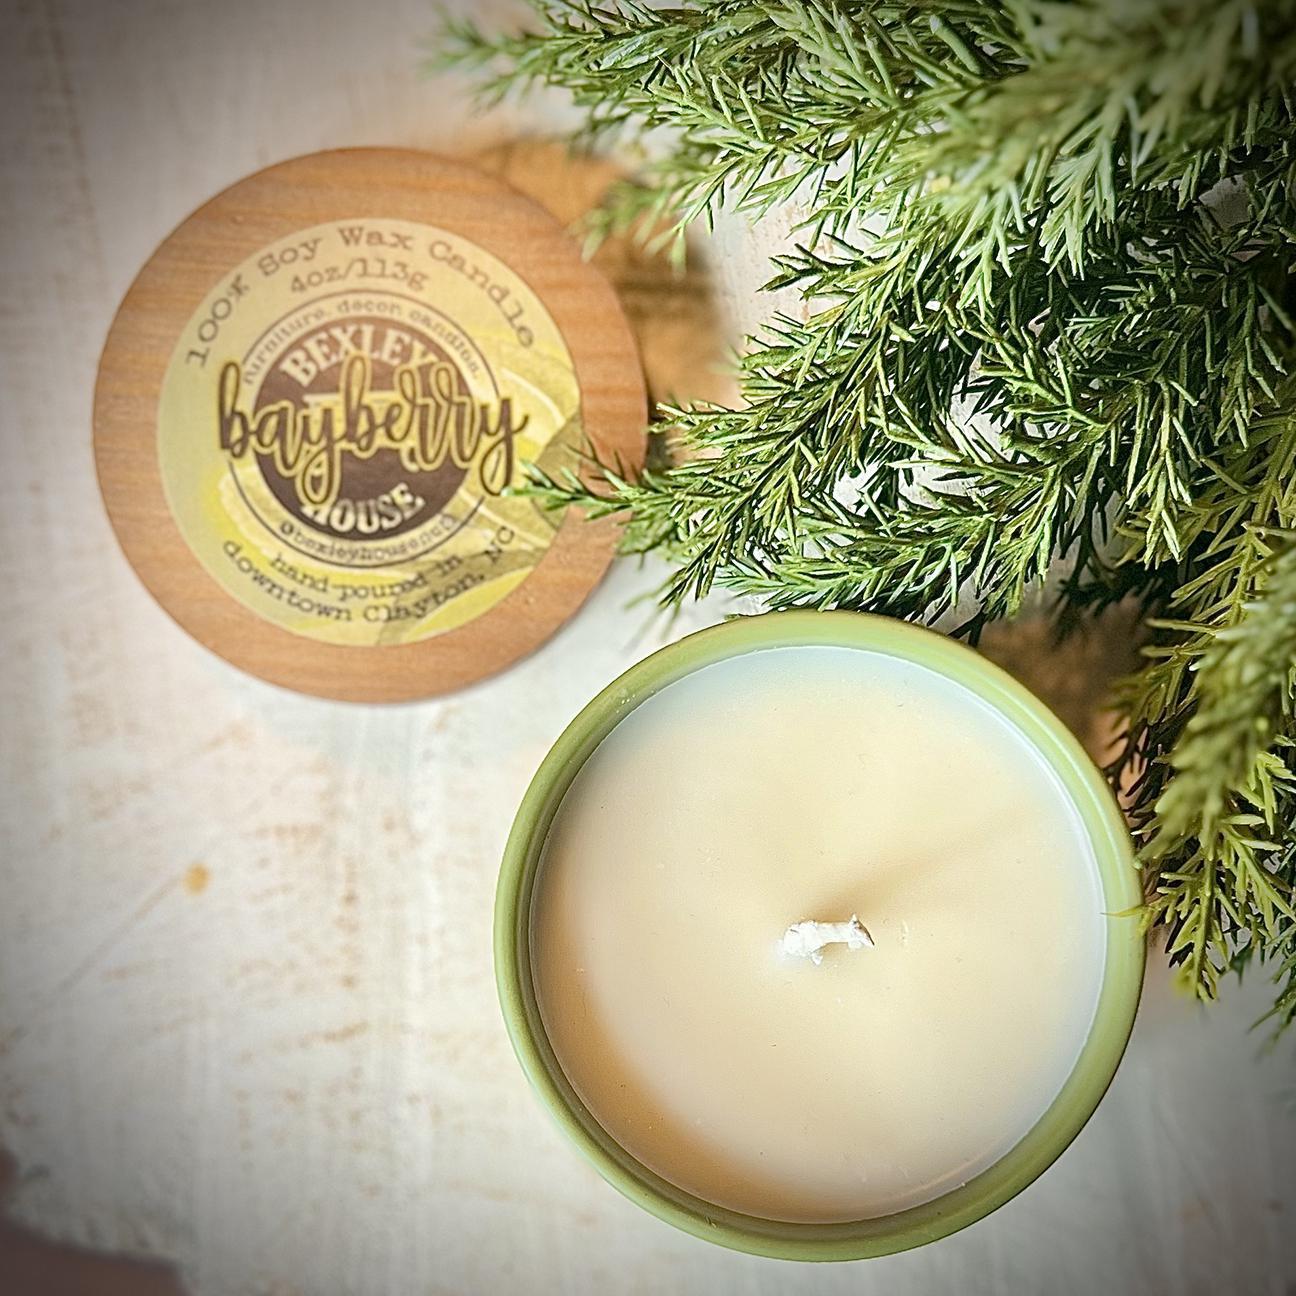 Bexley House Limited Edition Bayberry Candle